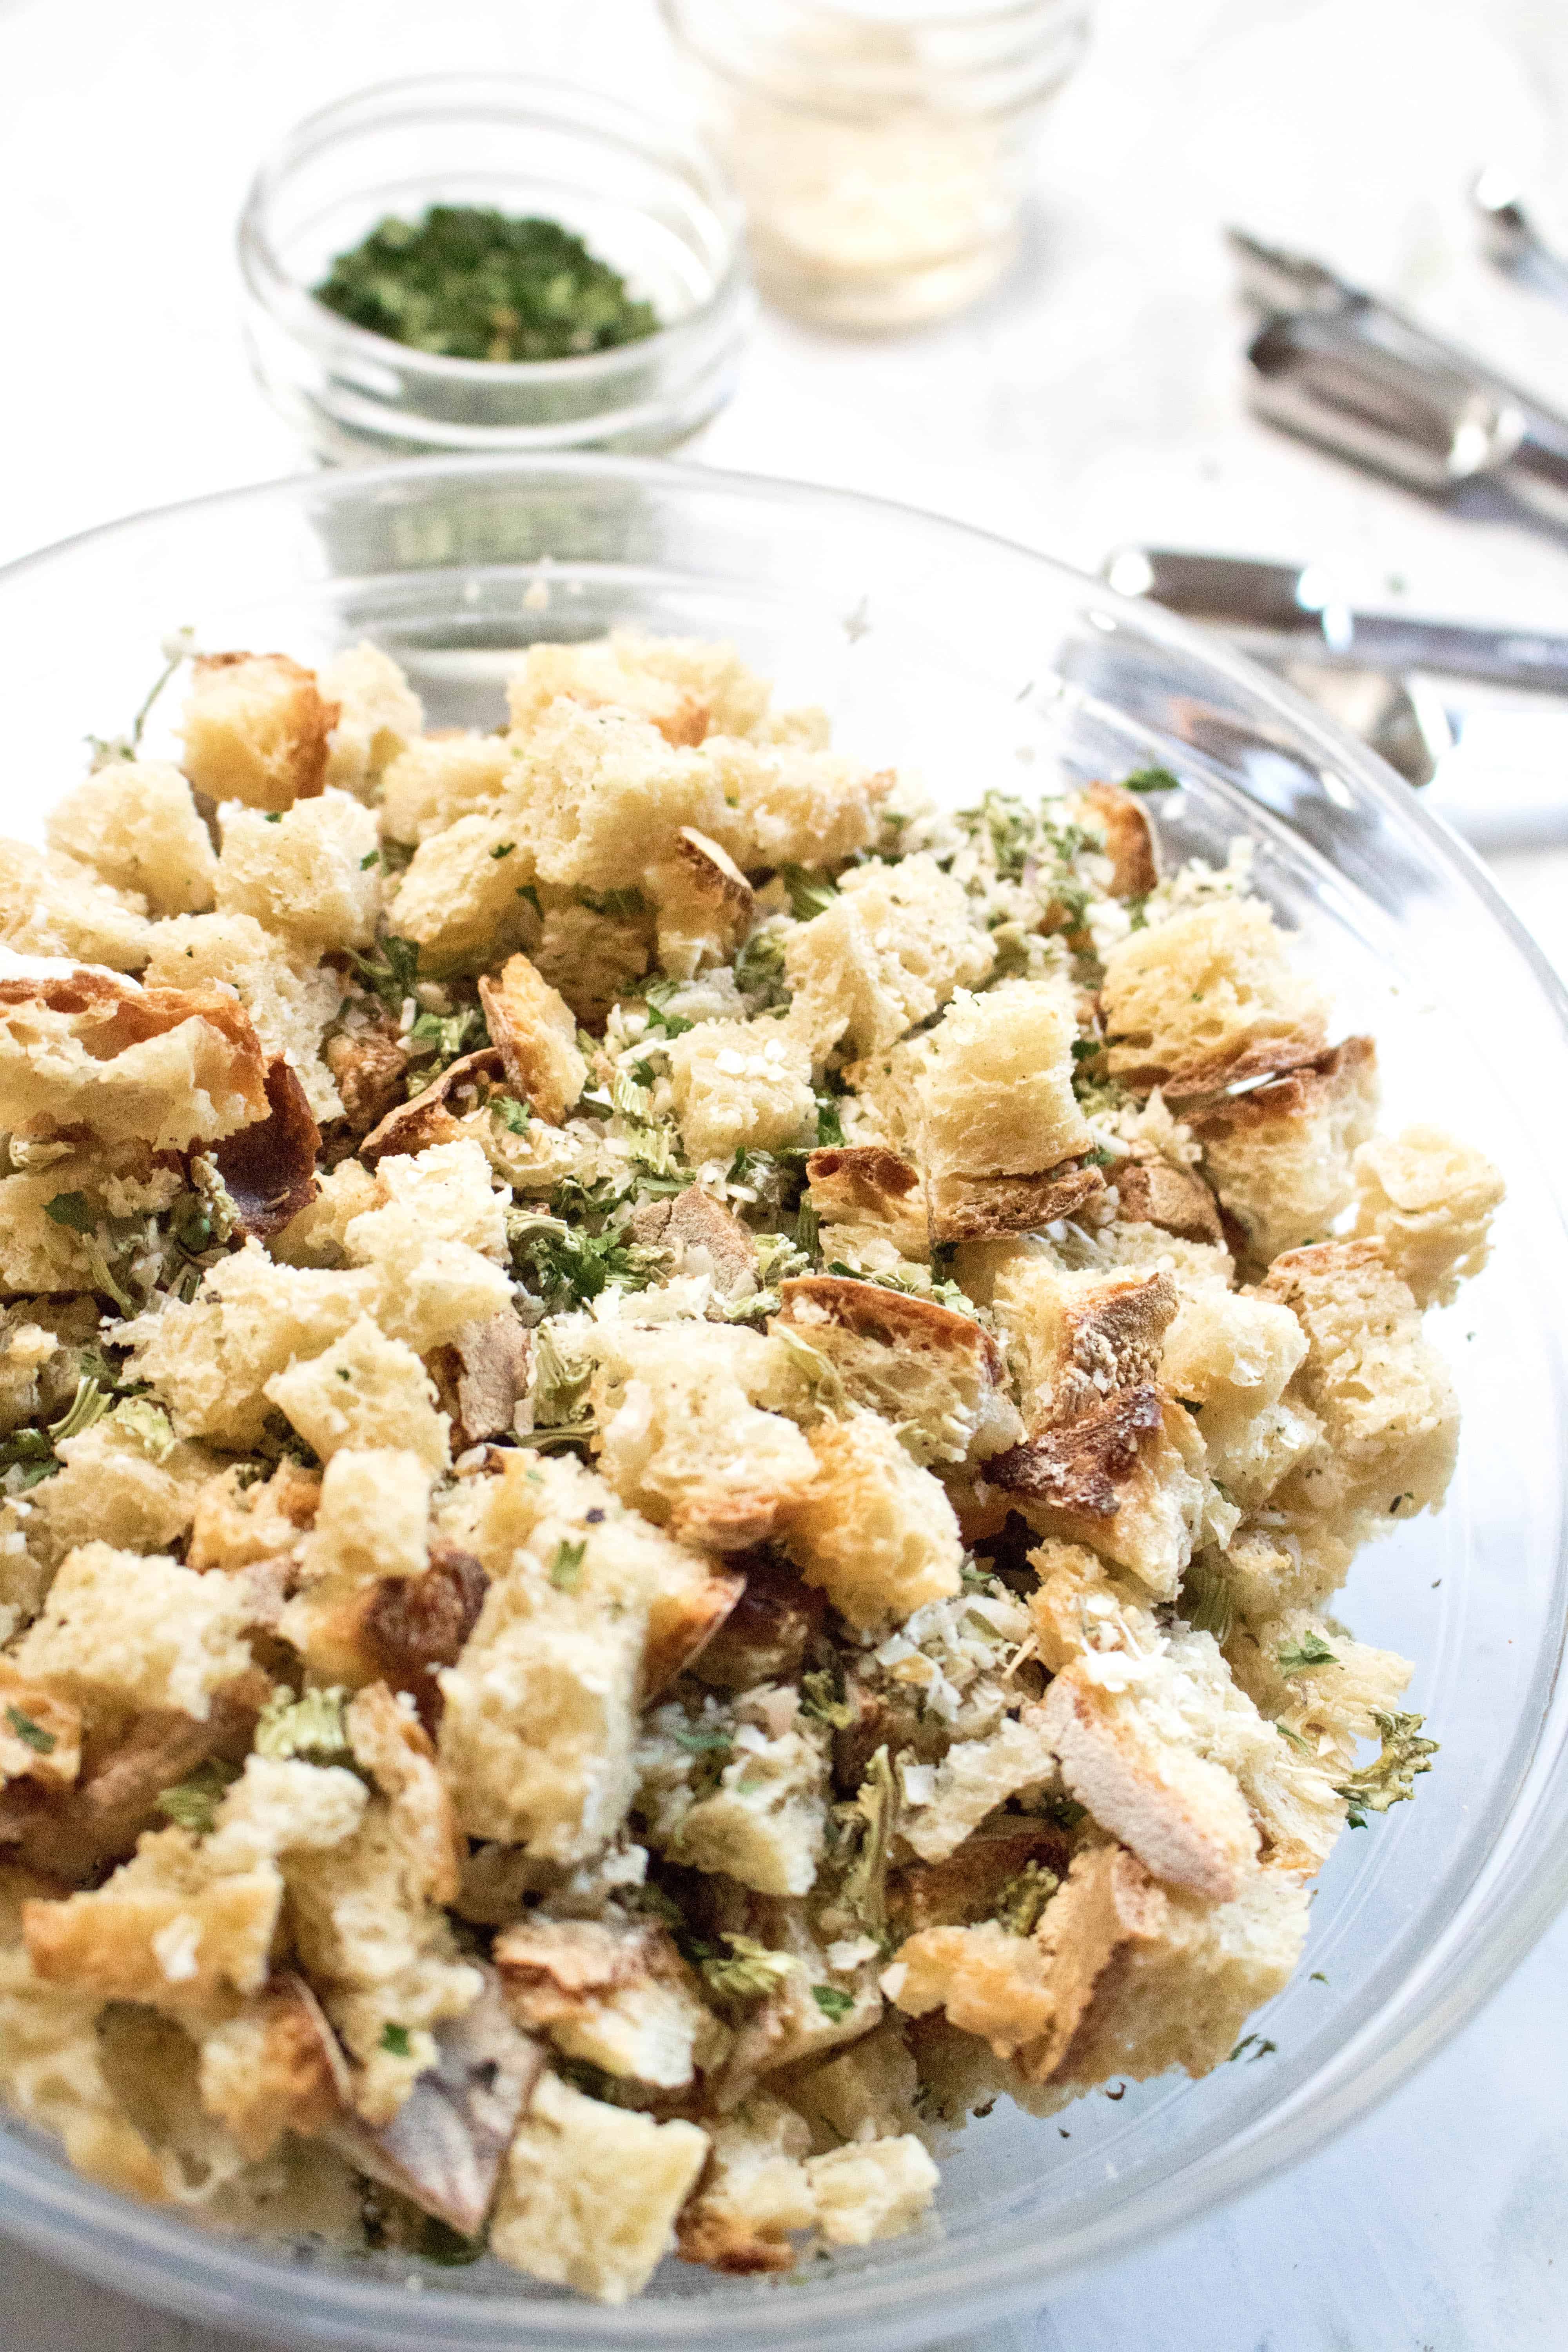 No need for a box.  Put that stale bread to use and make your own Copycat Boxed Stuffing Mix From Scratch!